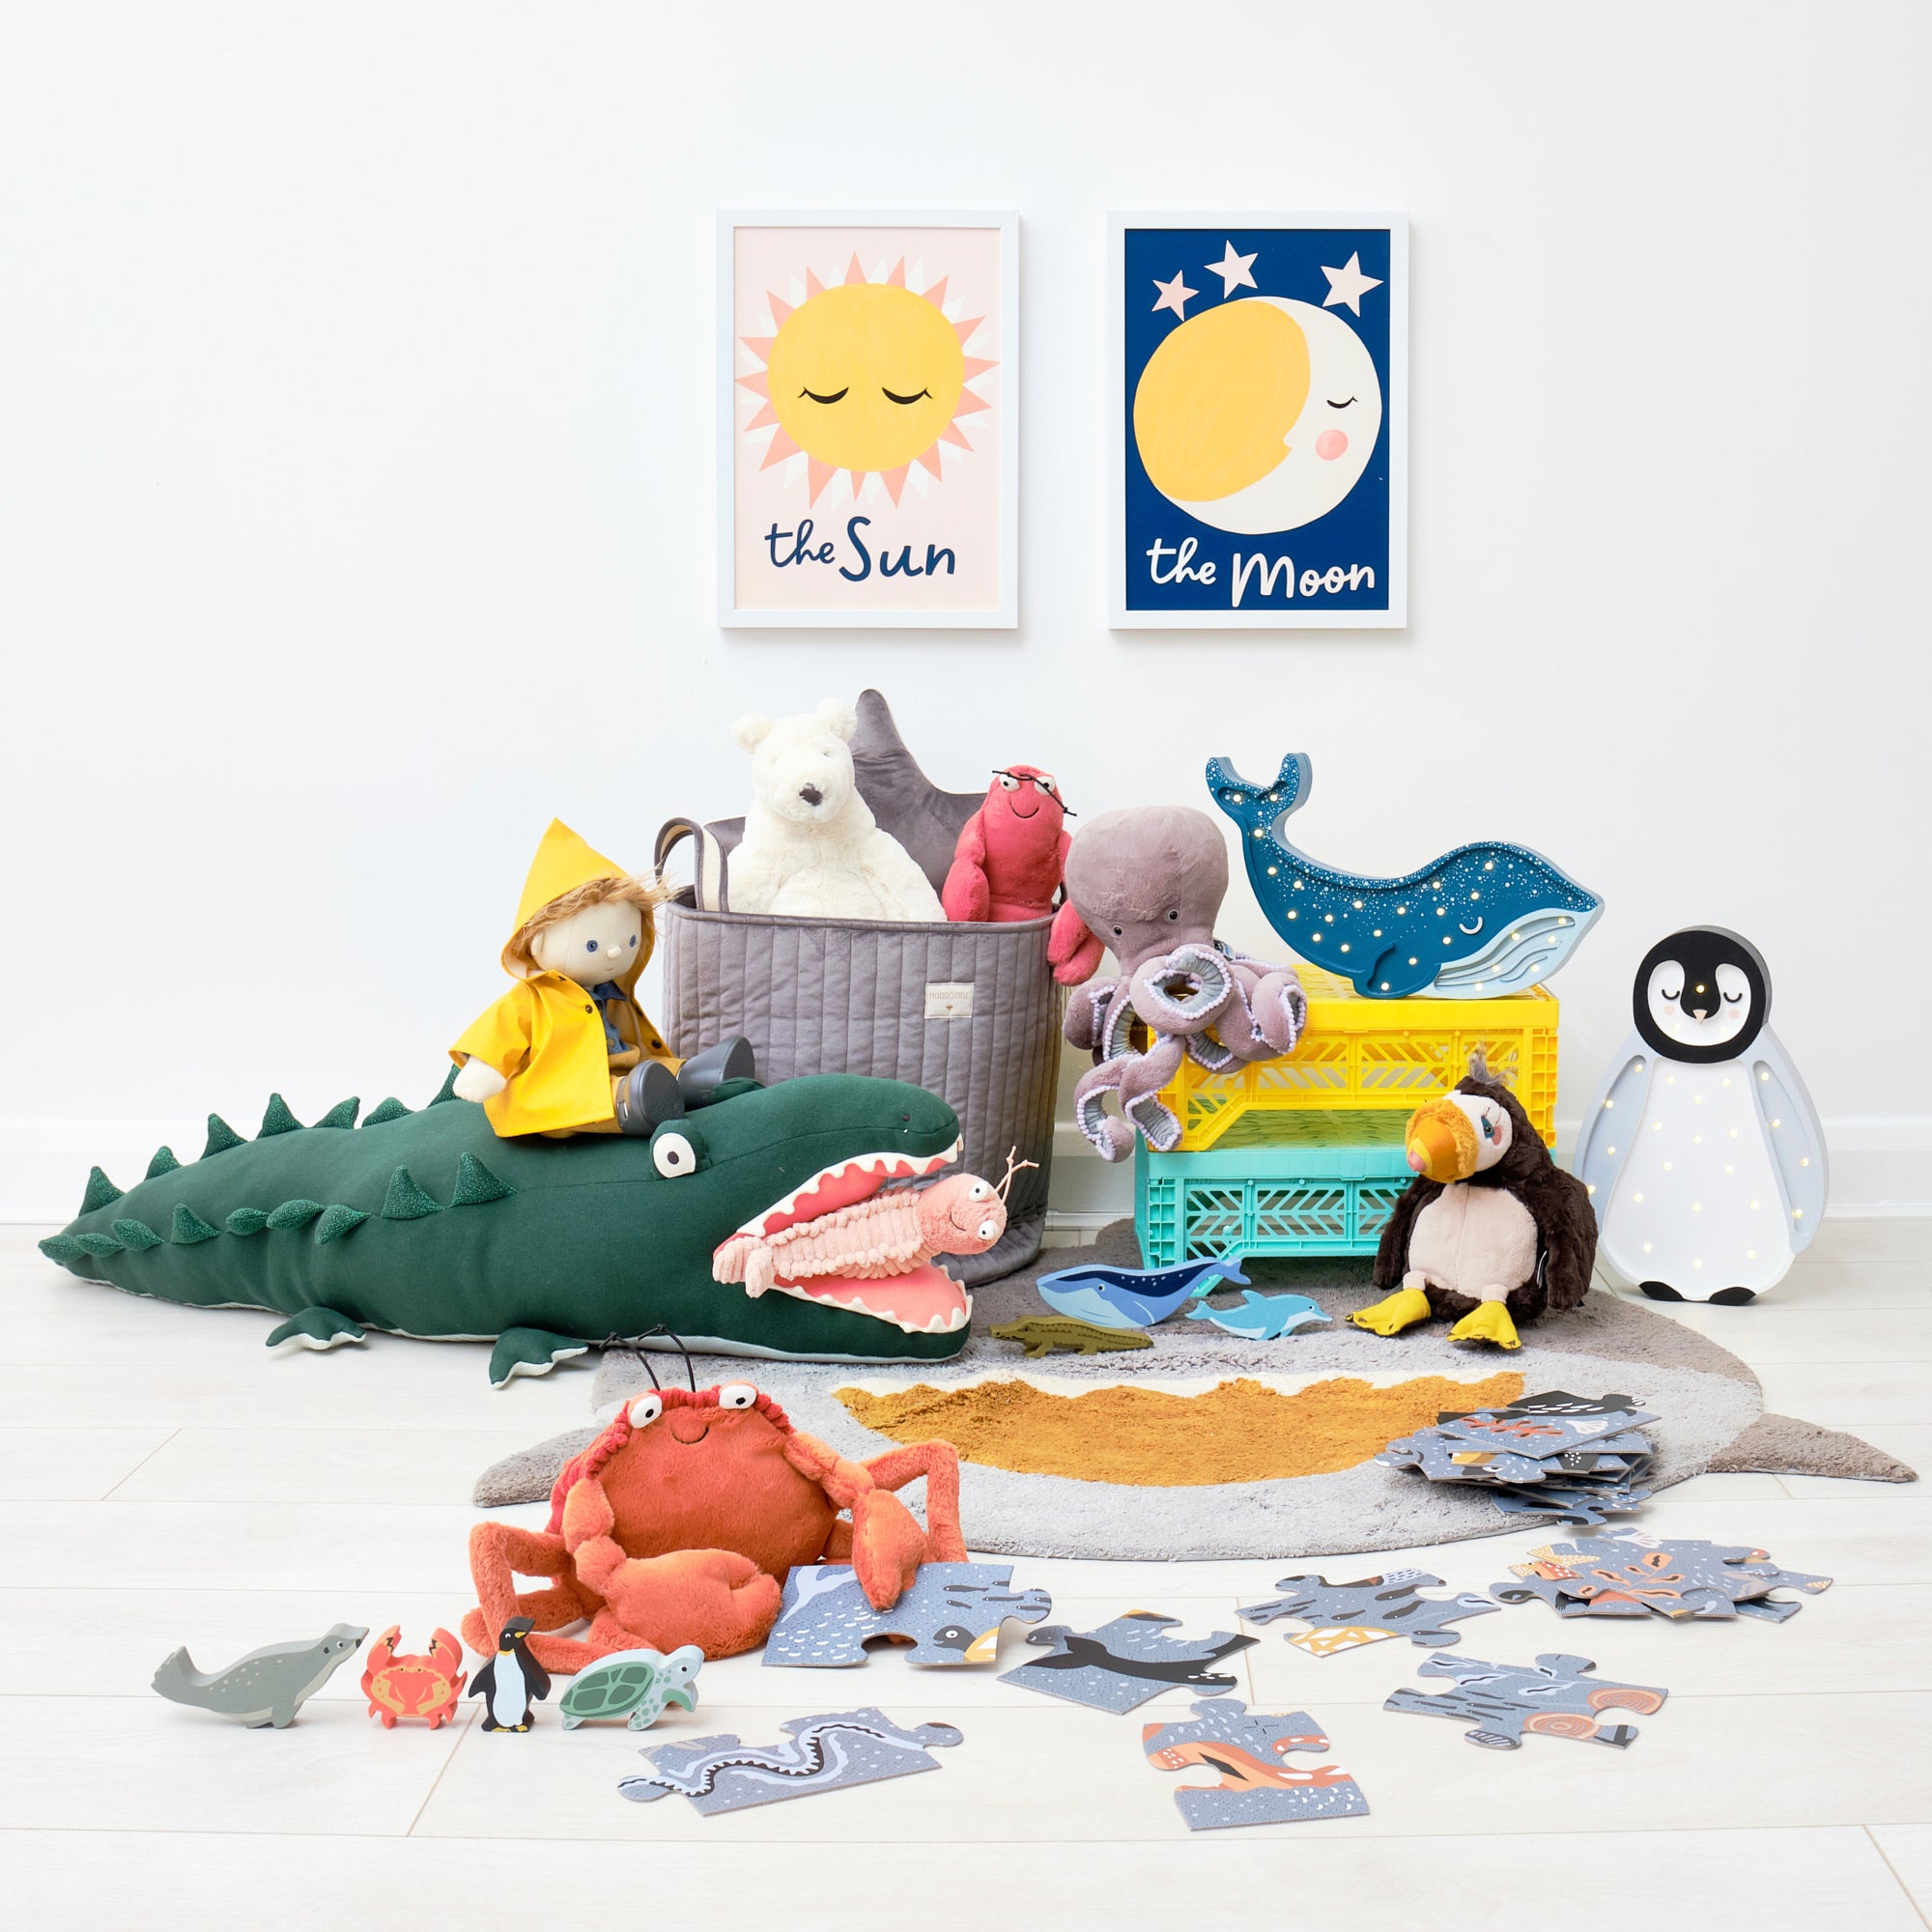 Toys for Ocean Explorers, styled by Bobby Rabbit.